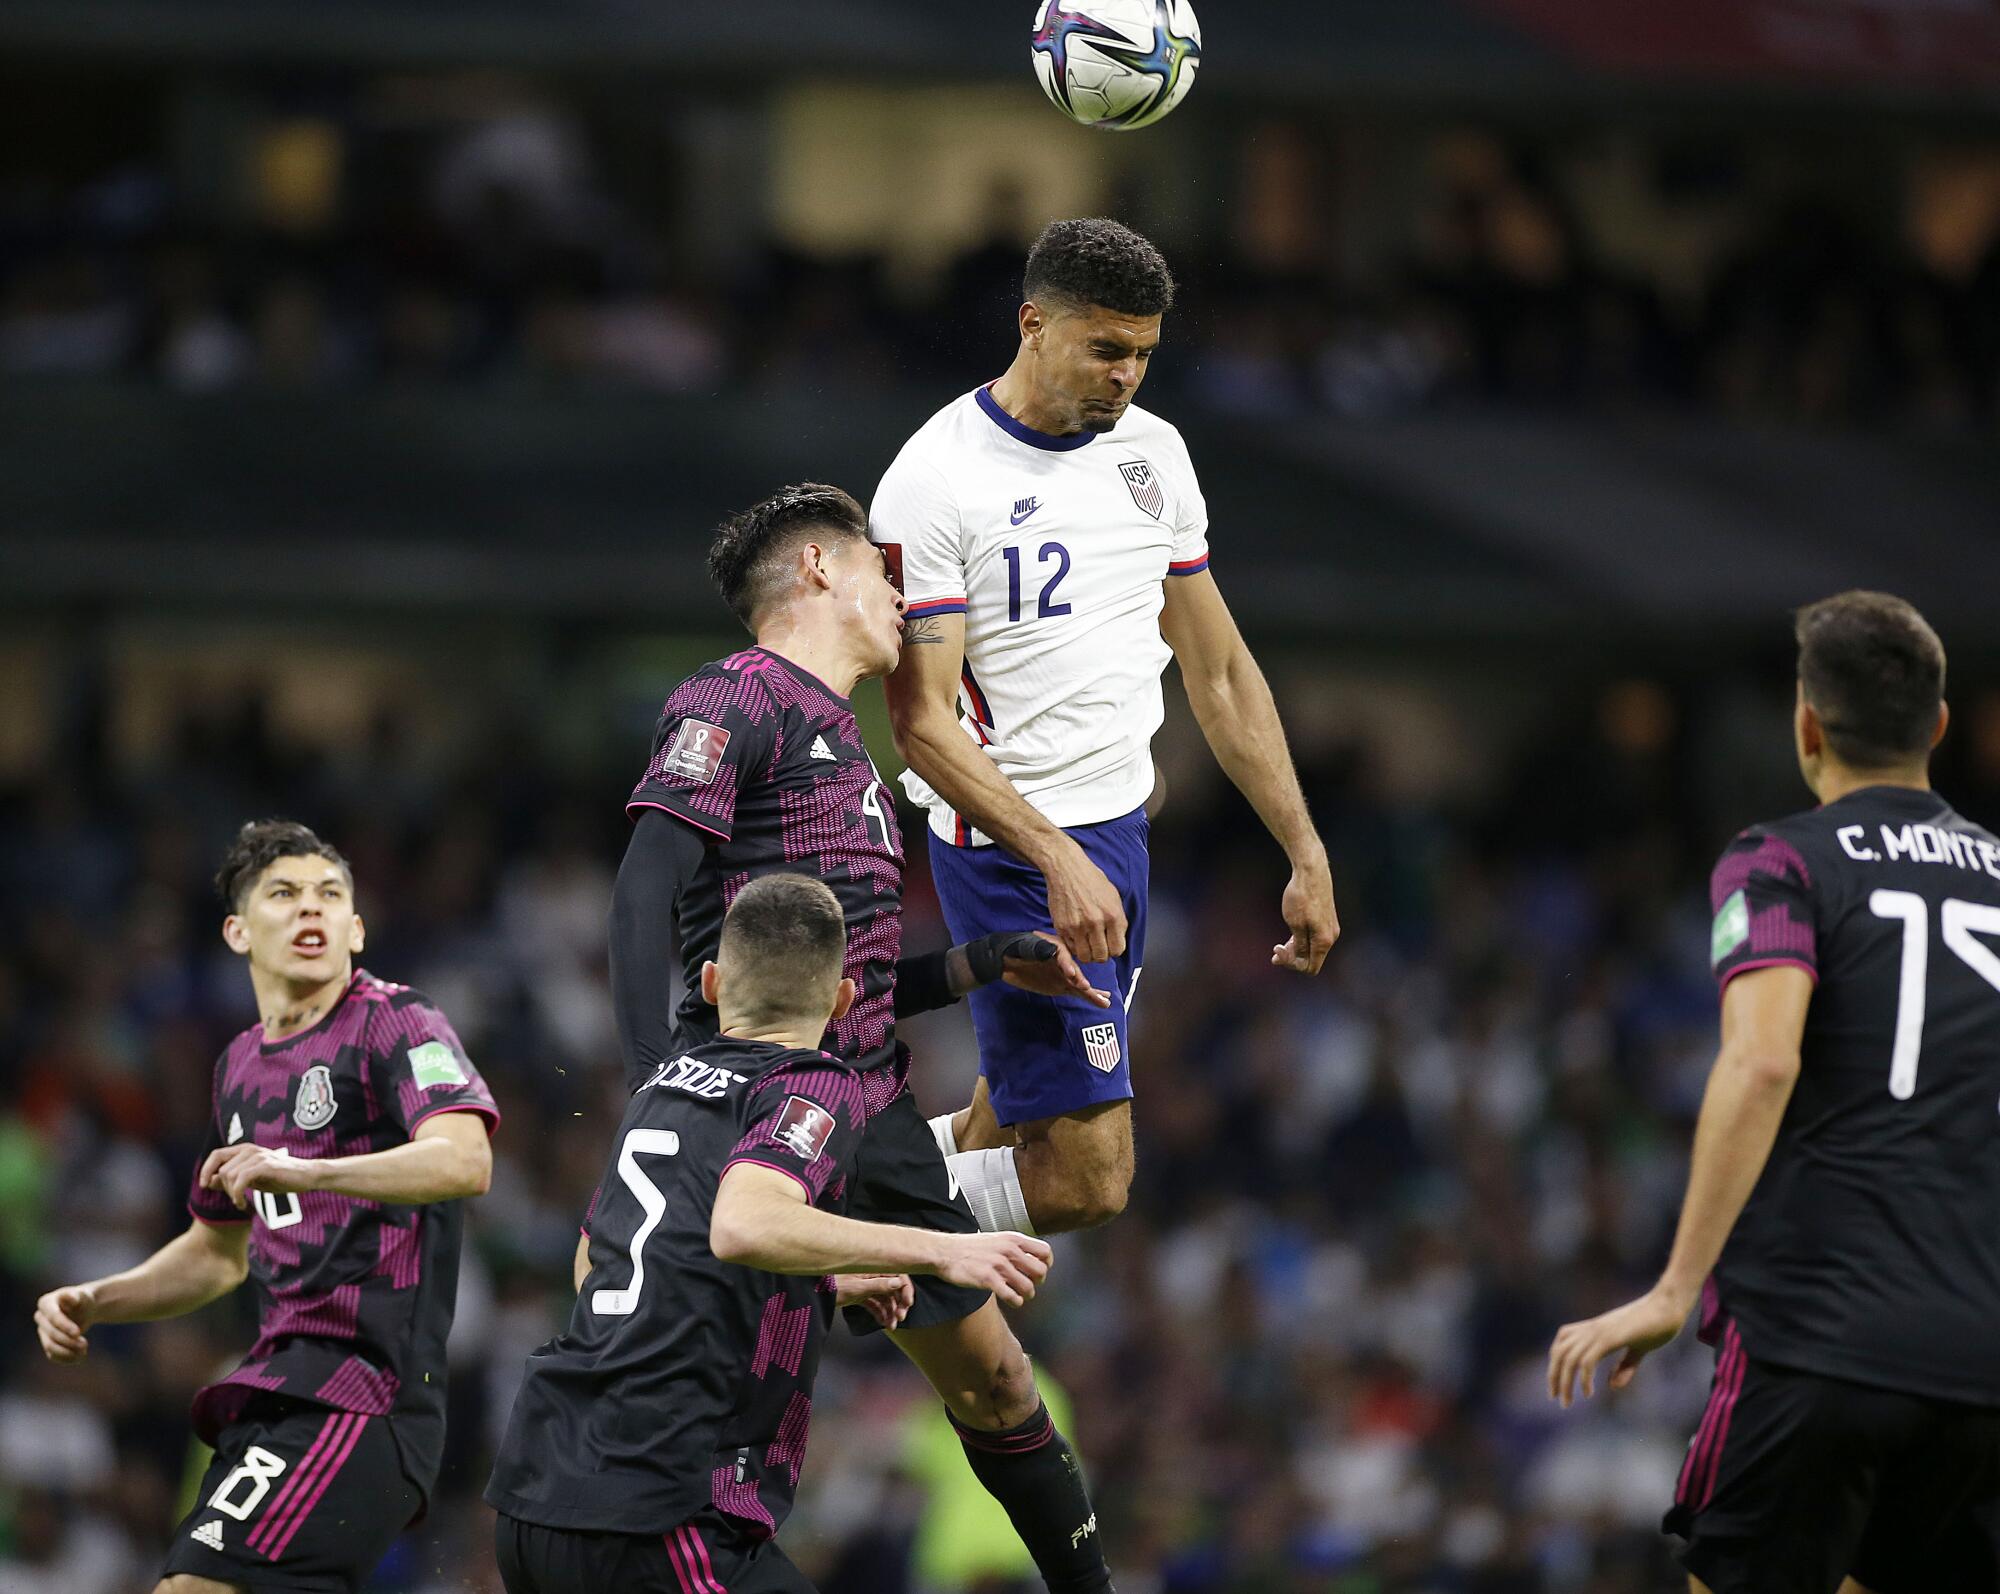 U.S. defender Miles Robinson, top, and Mexico defender Johan Vazquez and other Mexico players battle.